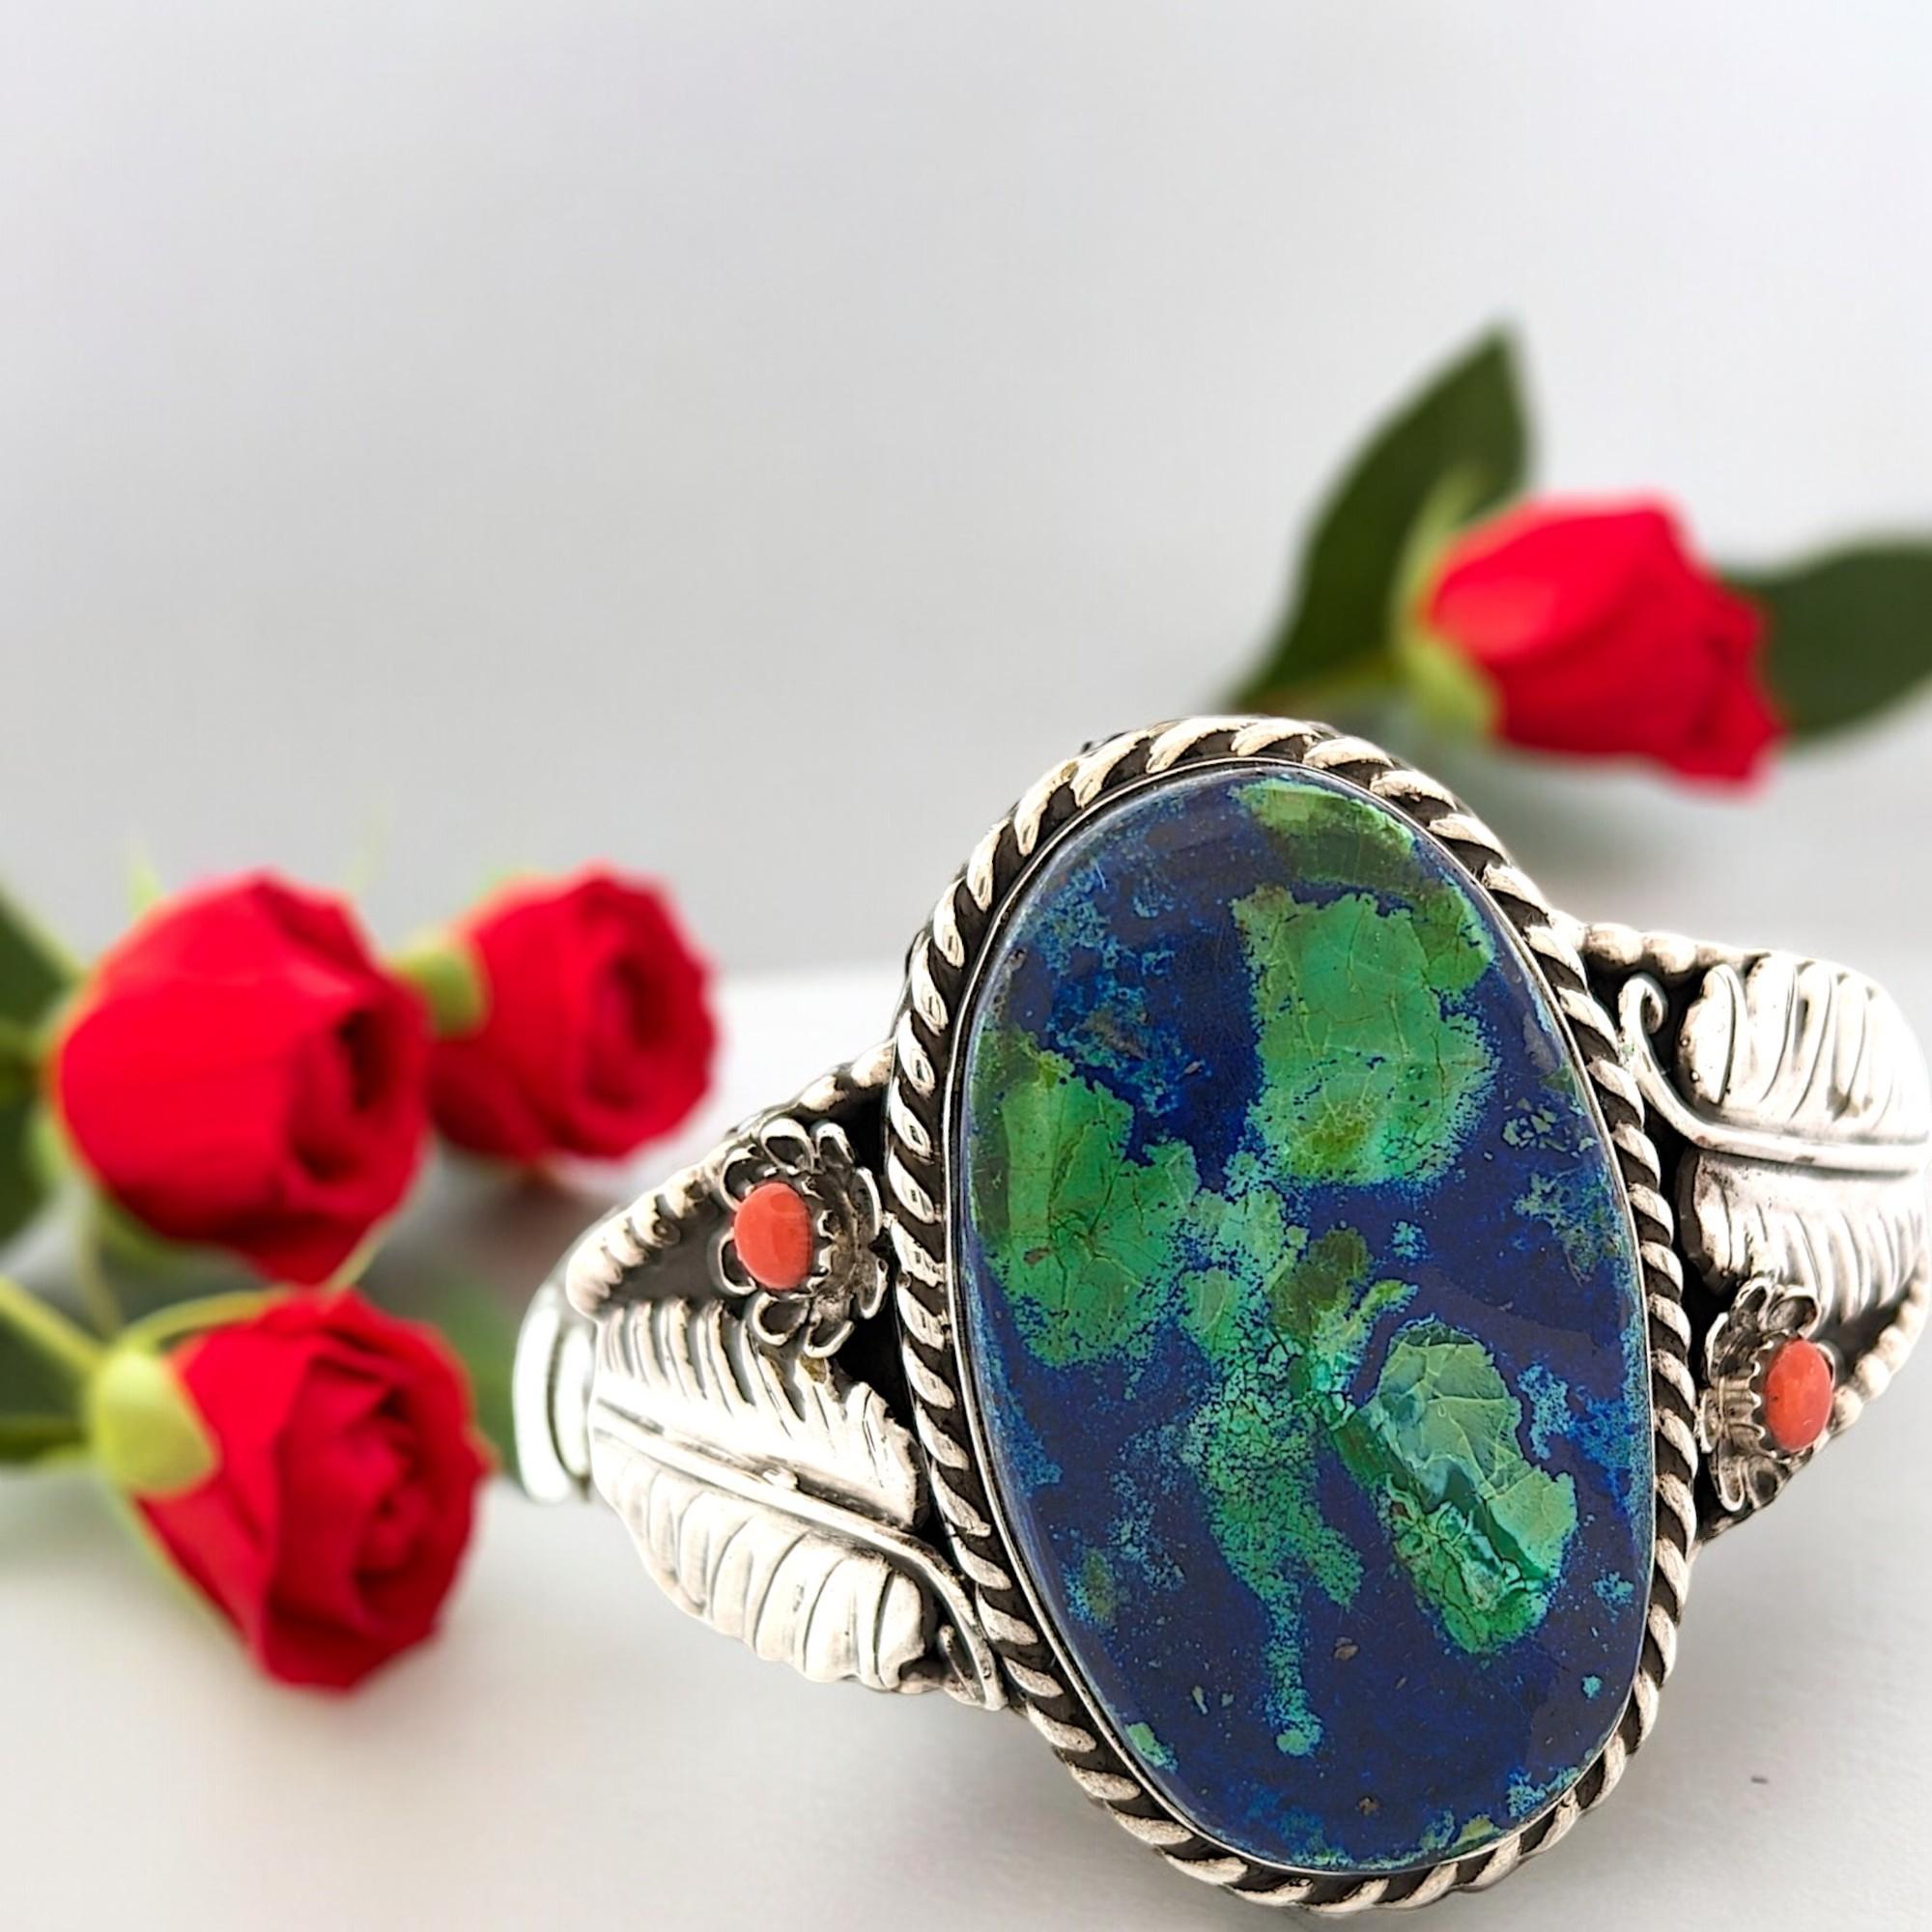 This captivating cuff bracelet is a stunning convergence of natural elements, crafted from gleaming sterling silver. The centerpiece takes center stage, a mesmerizing combination of azurite and malachite gemstones. Azurite, with its deep blue hues